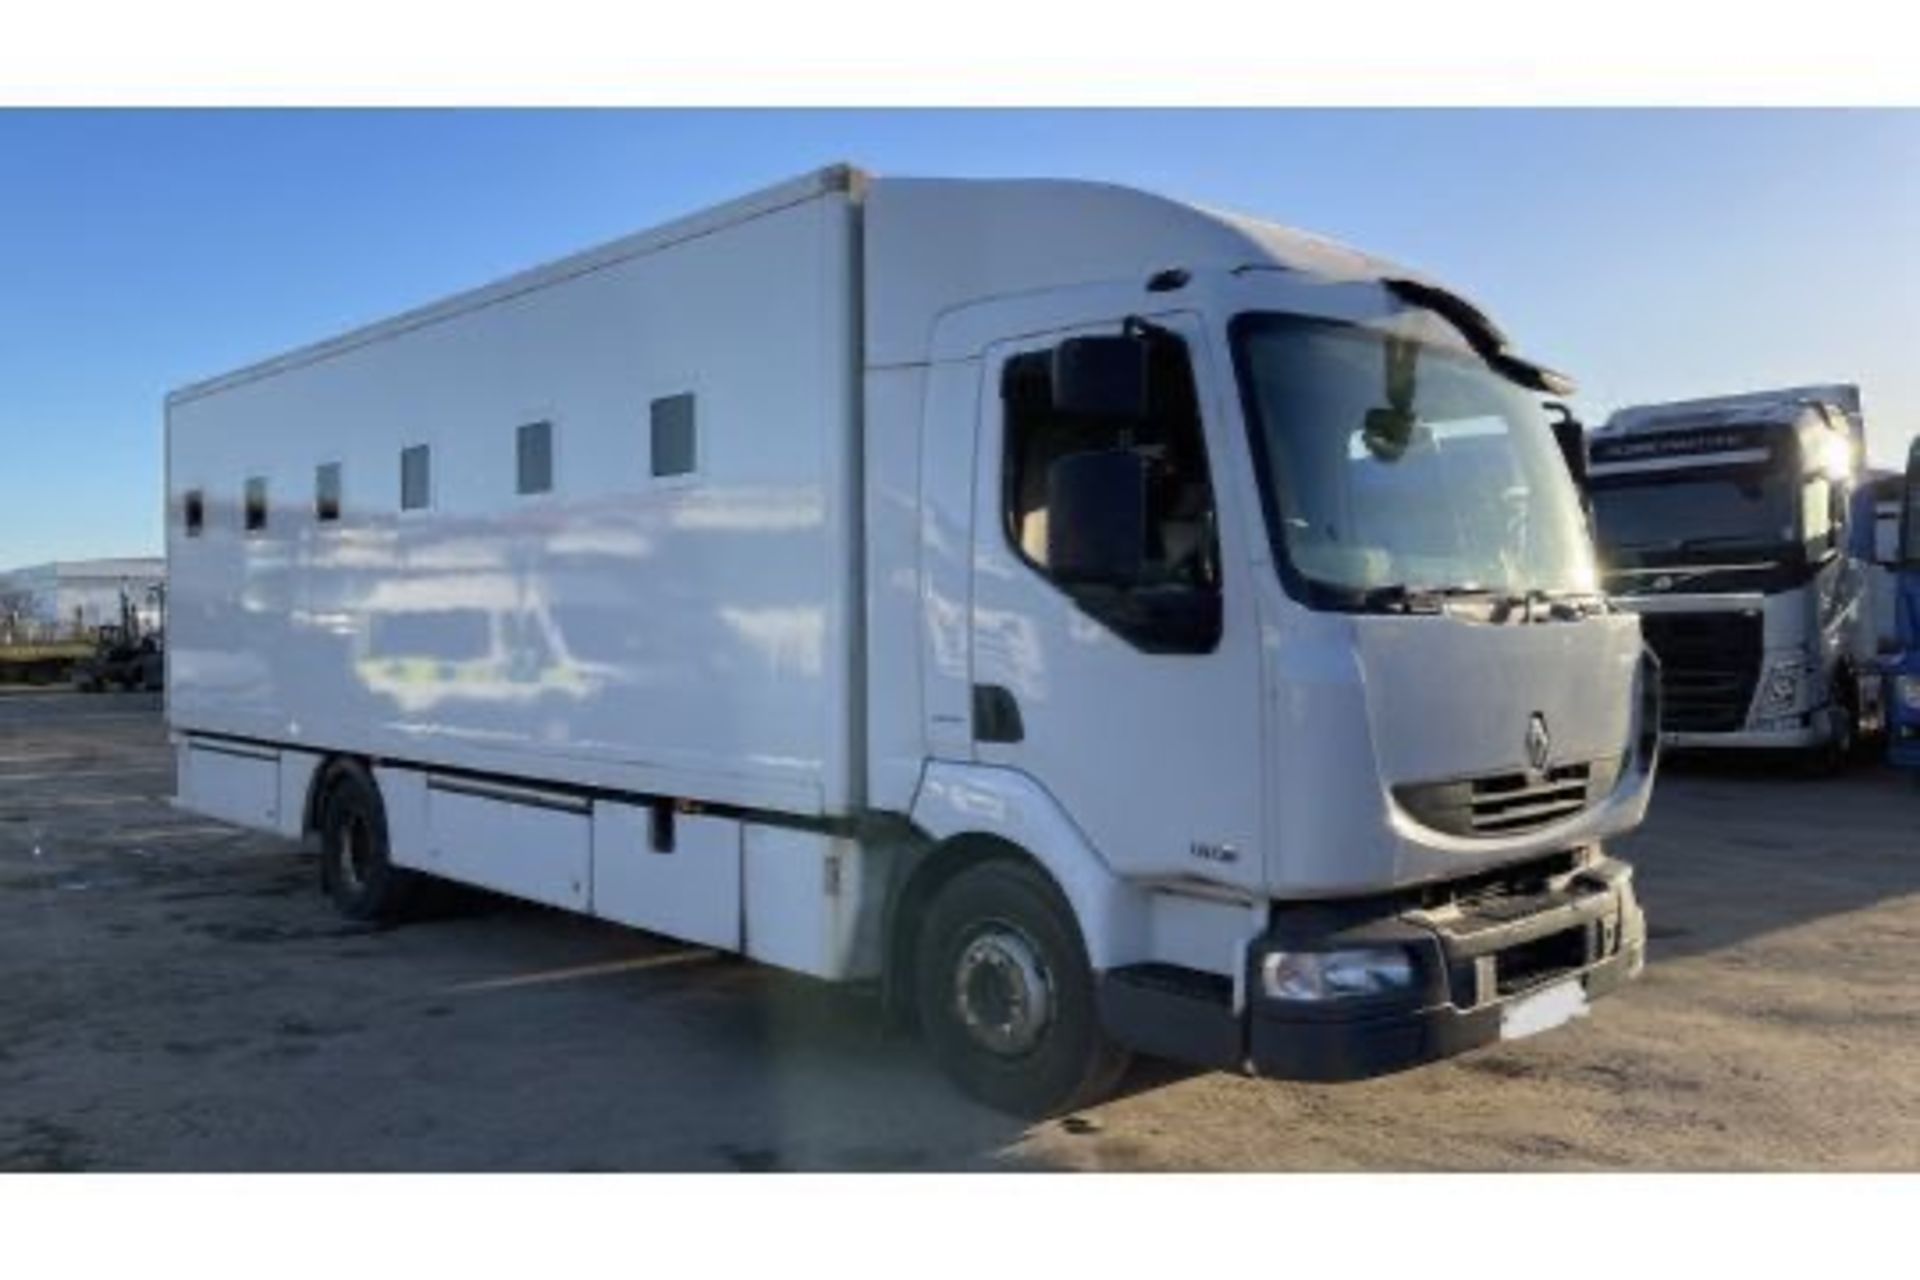 PO11 OXN 2011 RENAULT MIDLUM 180 DXI. MANUAL GEARBOX. DIESEL A/C. REAR VIEW CAMERA. 10 X CELLS.